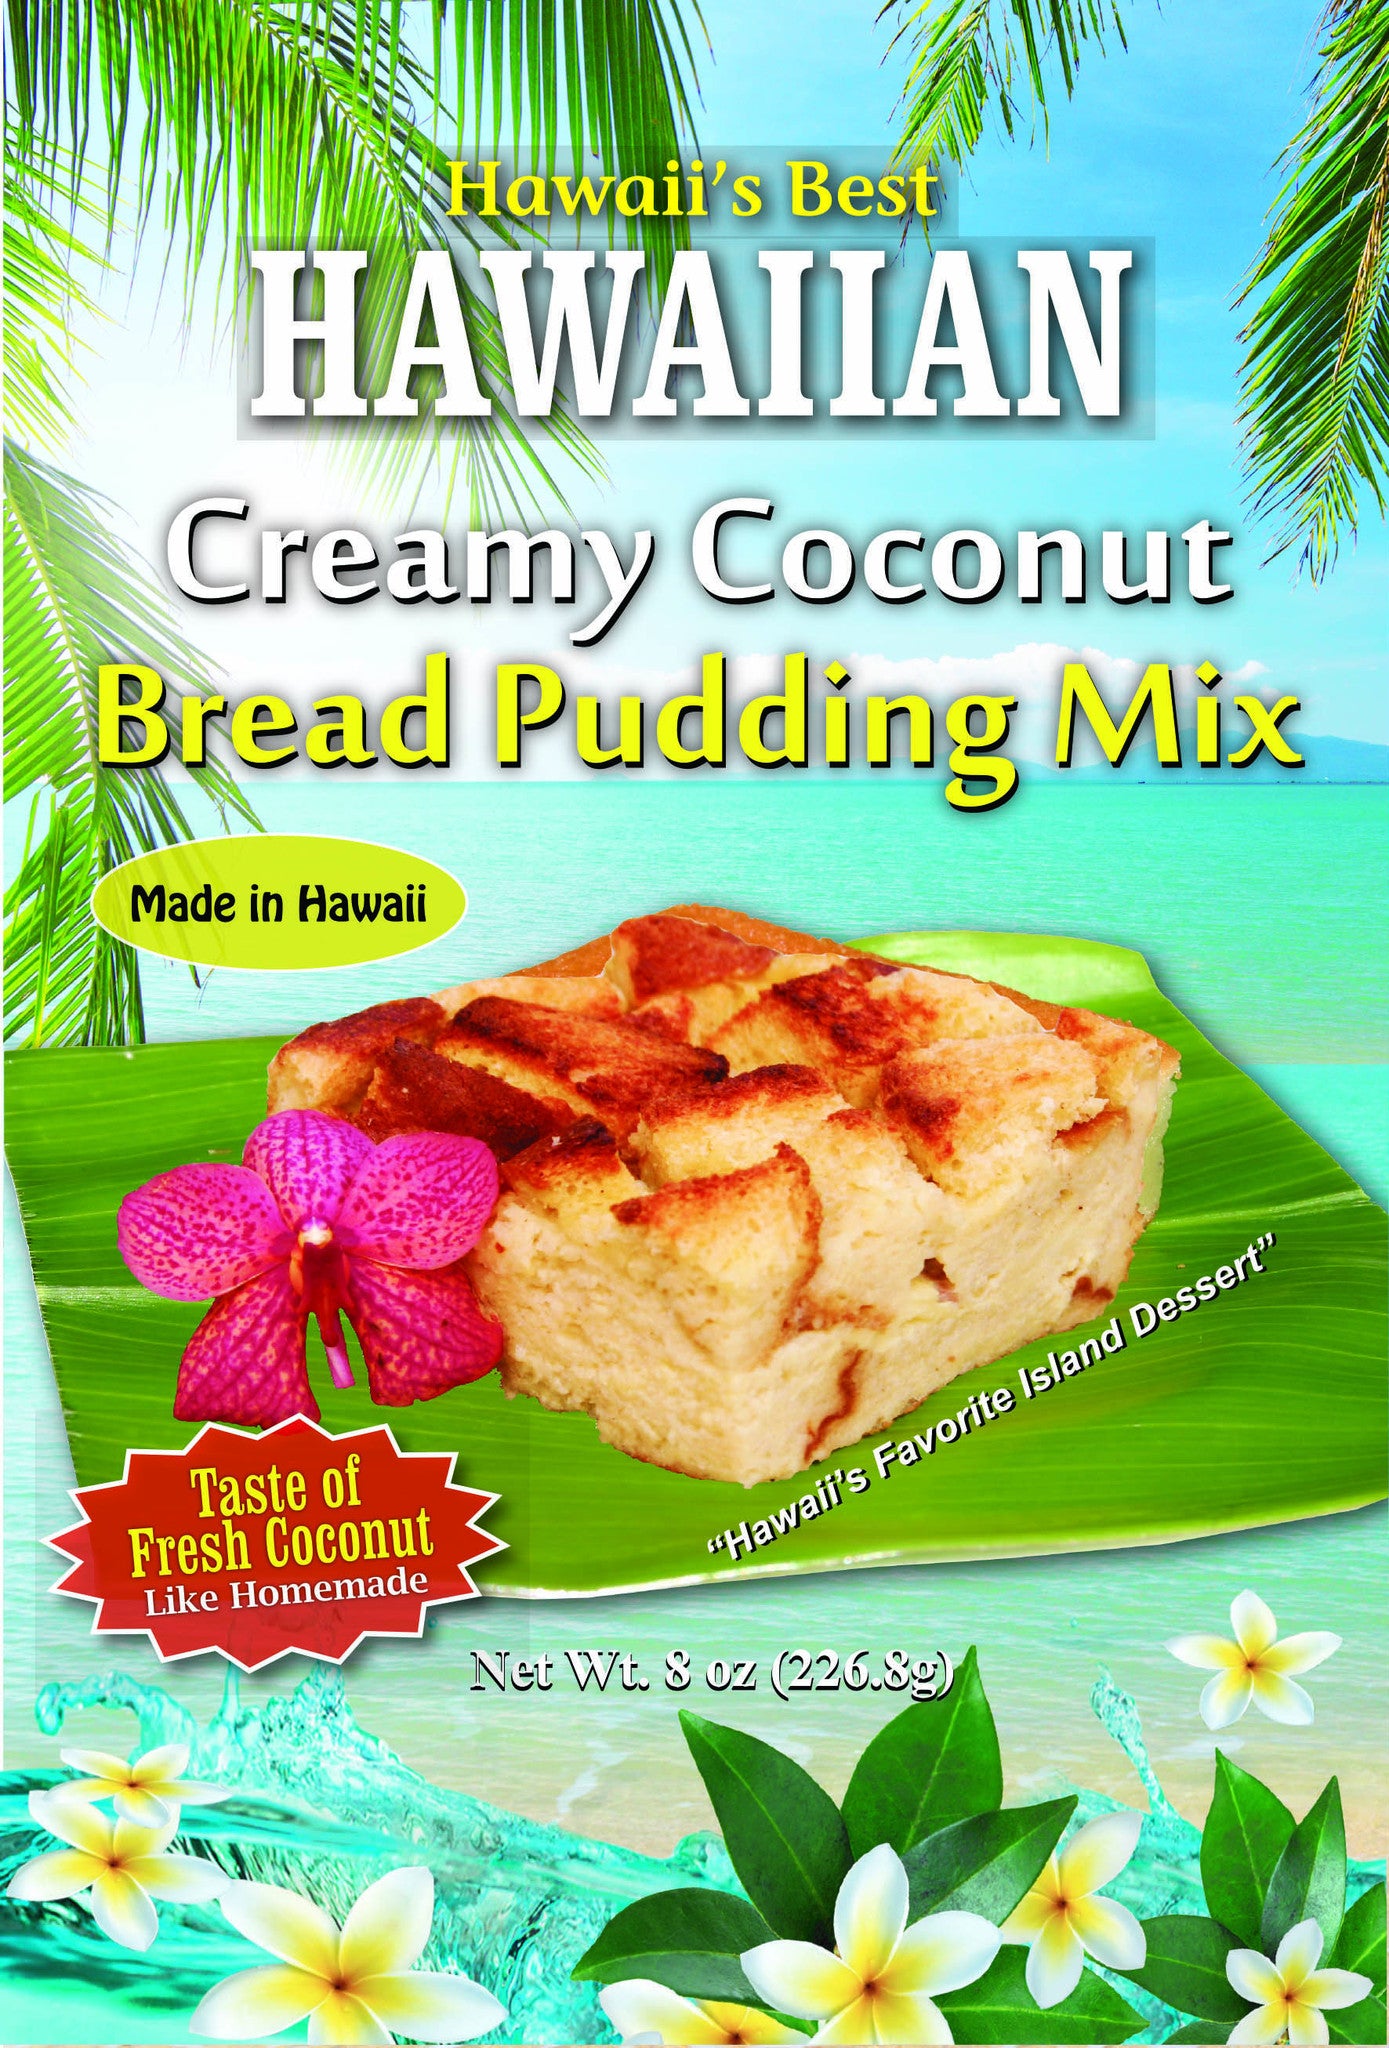 (1 BAG) CREAMY COCONUT BREAD PUDDING MIX - Makes 8x8 Pan.  10 MINUTES TO PREPARE IN MICROWAVE!  SEE OUR BLOG FOR INSTRUCTIONS